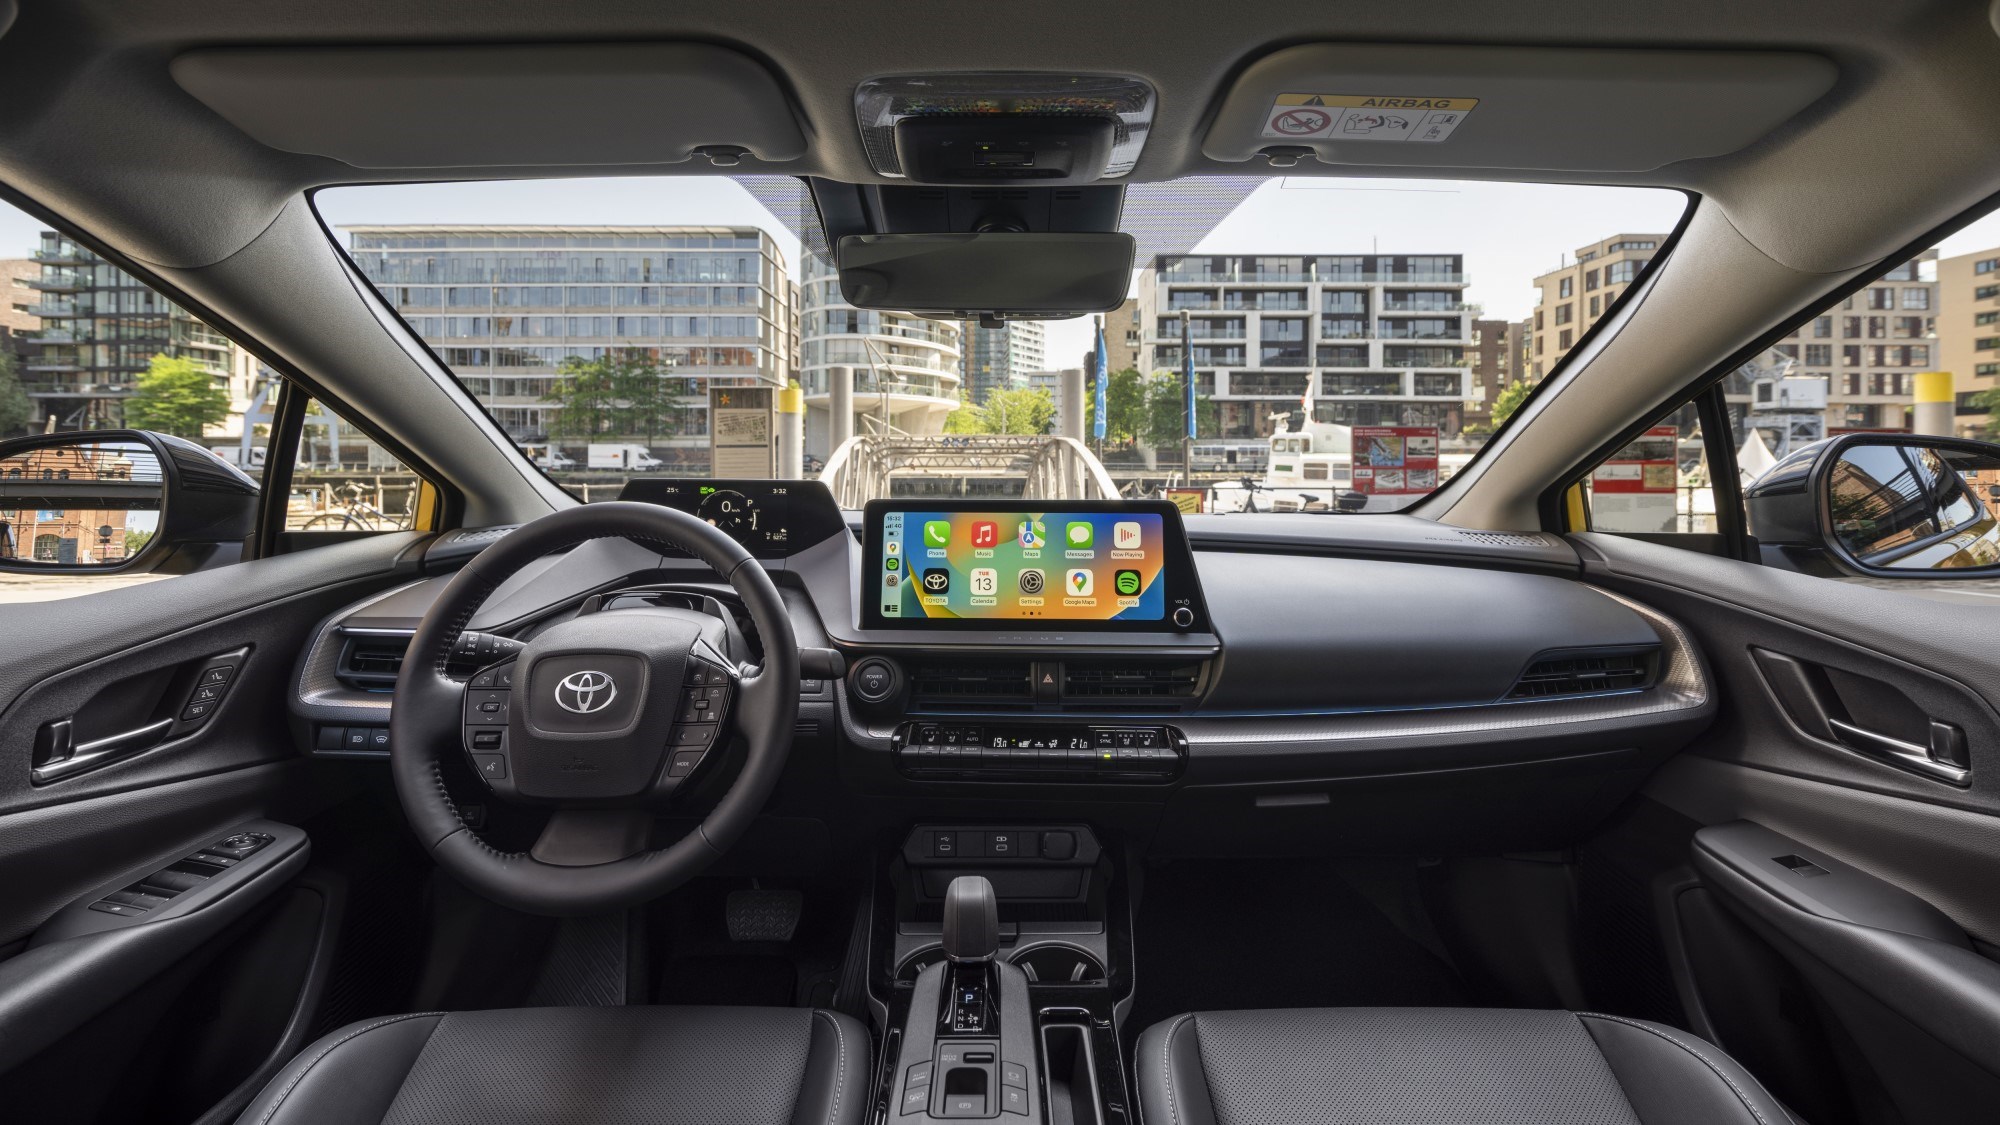 Toyota Prius - from the inside